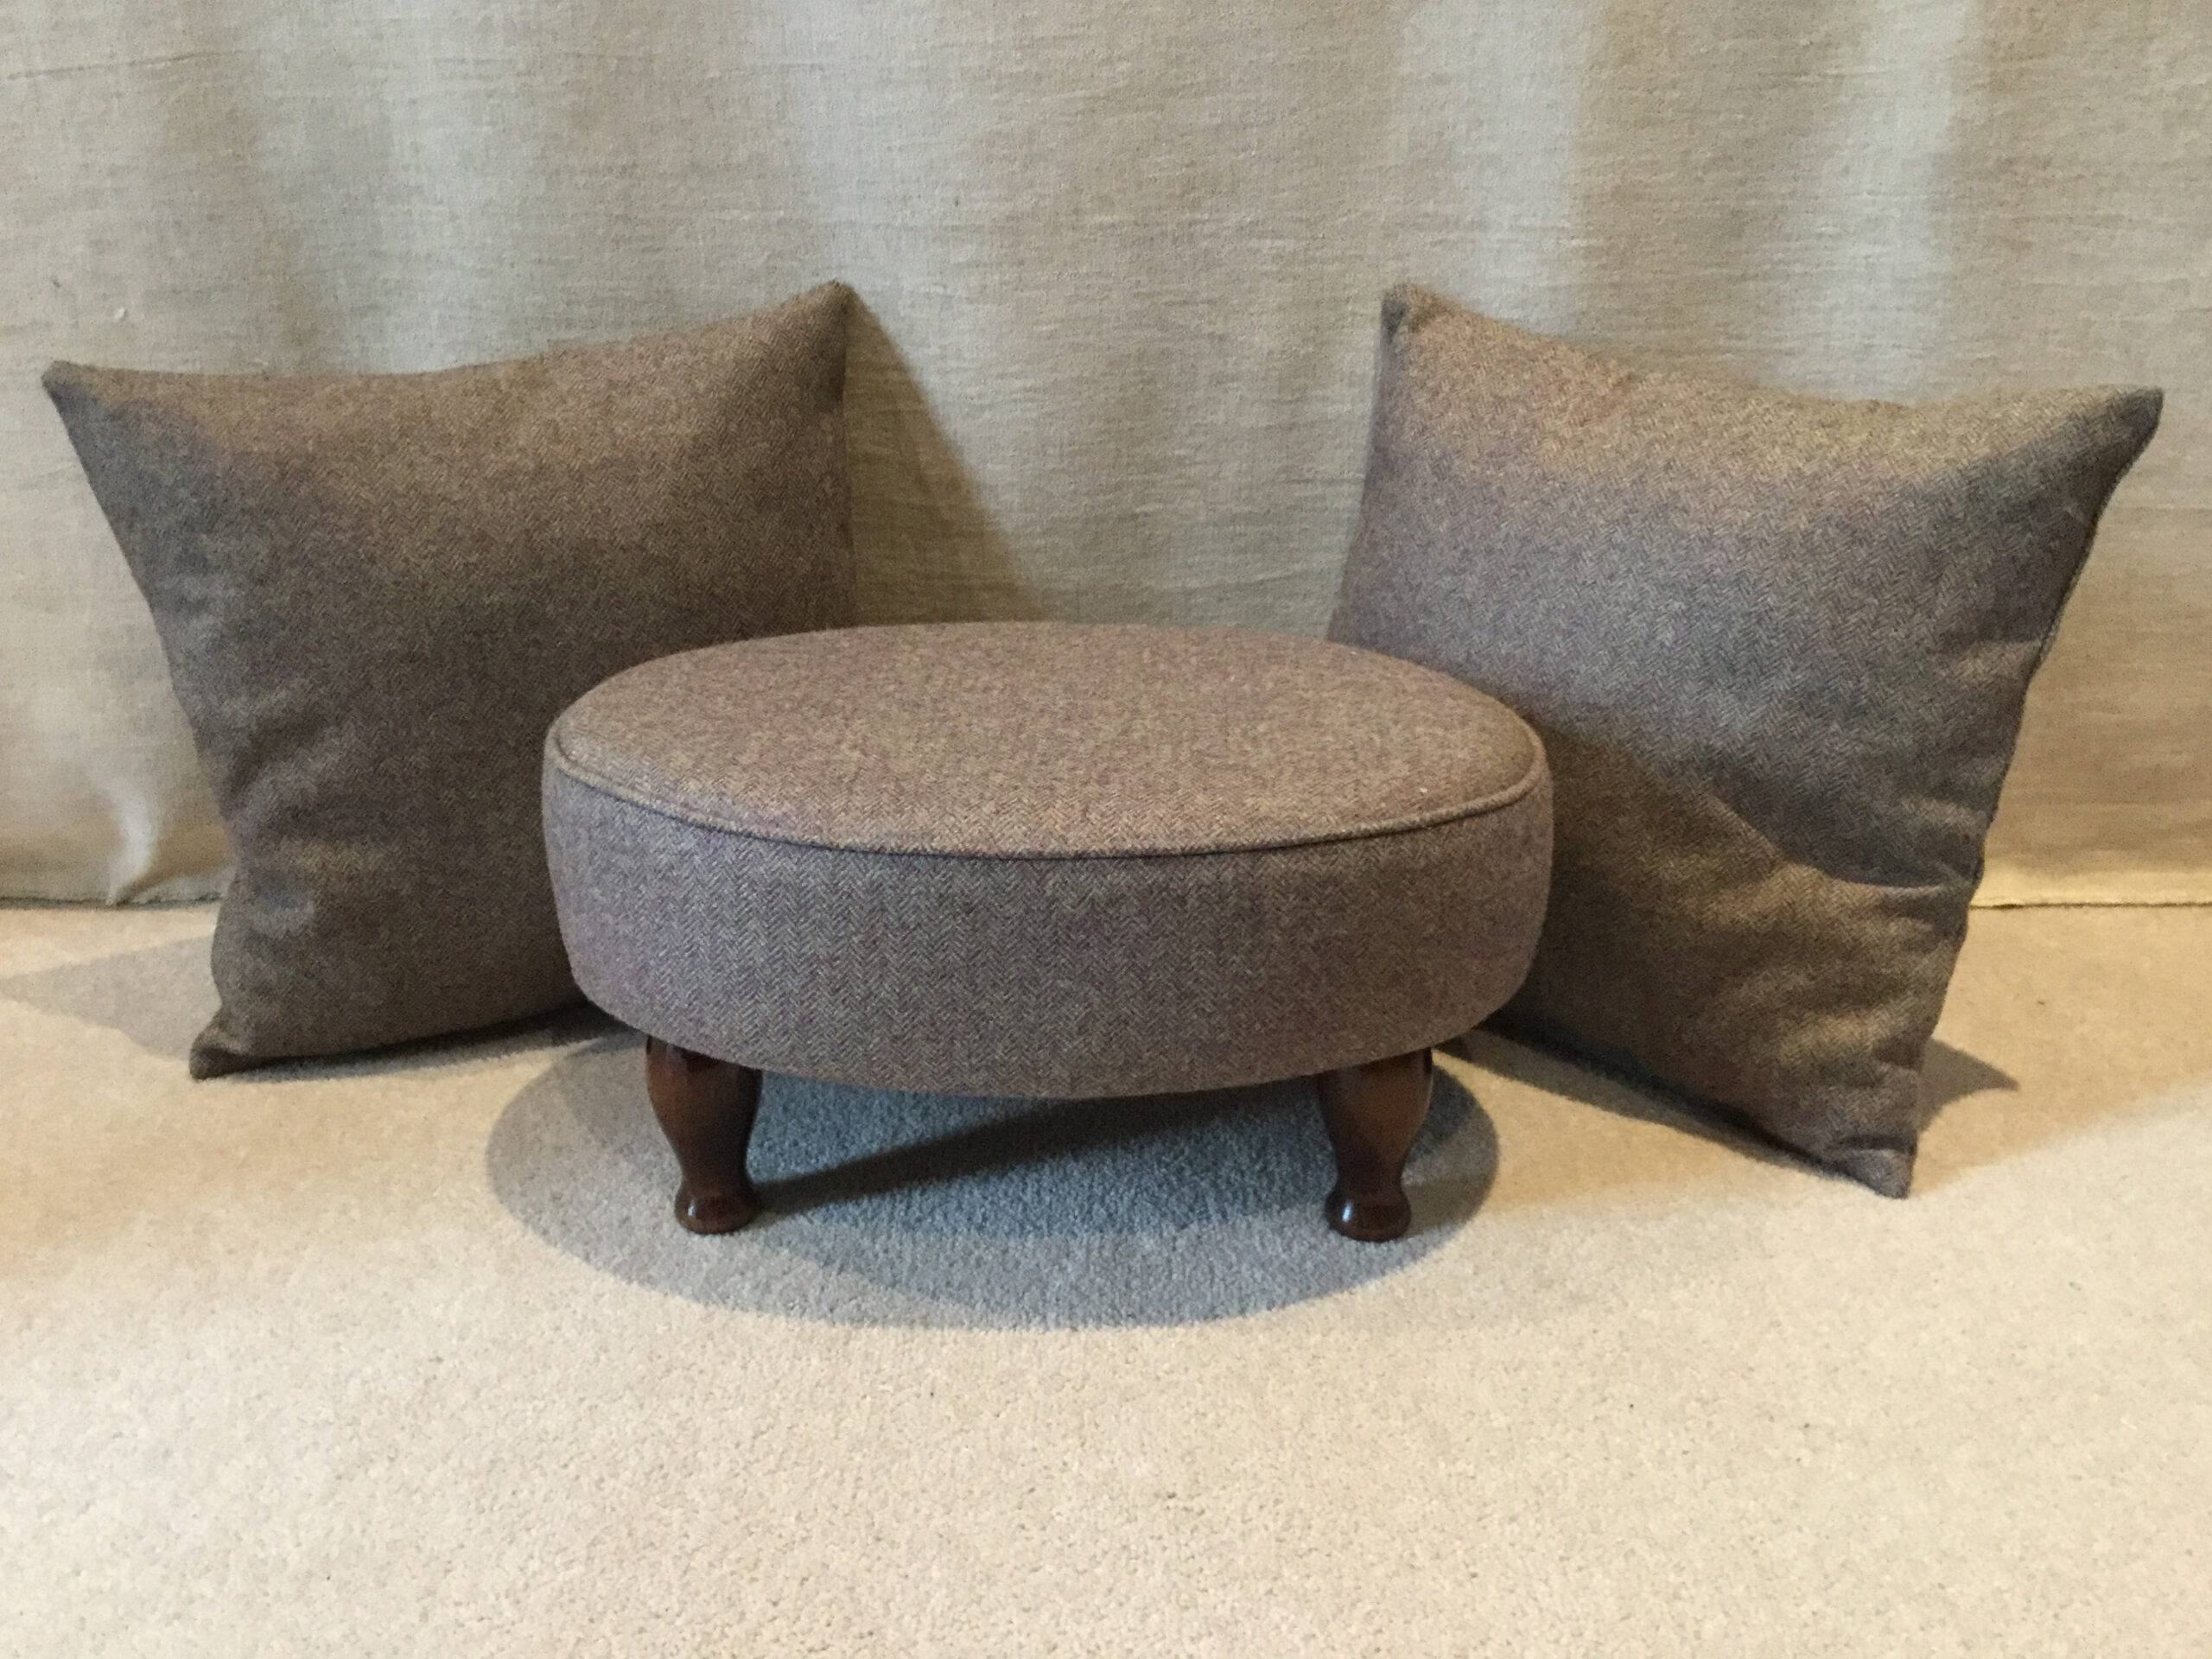 Oval Sherborne Footstool with matching cushions